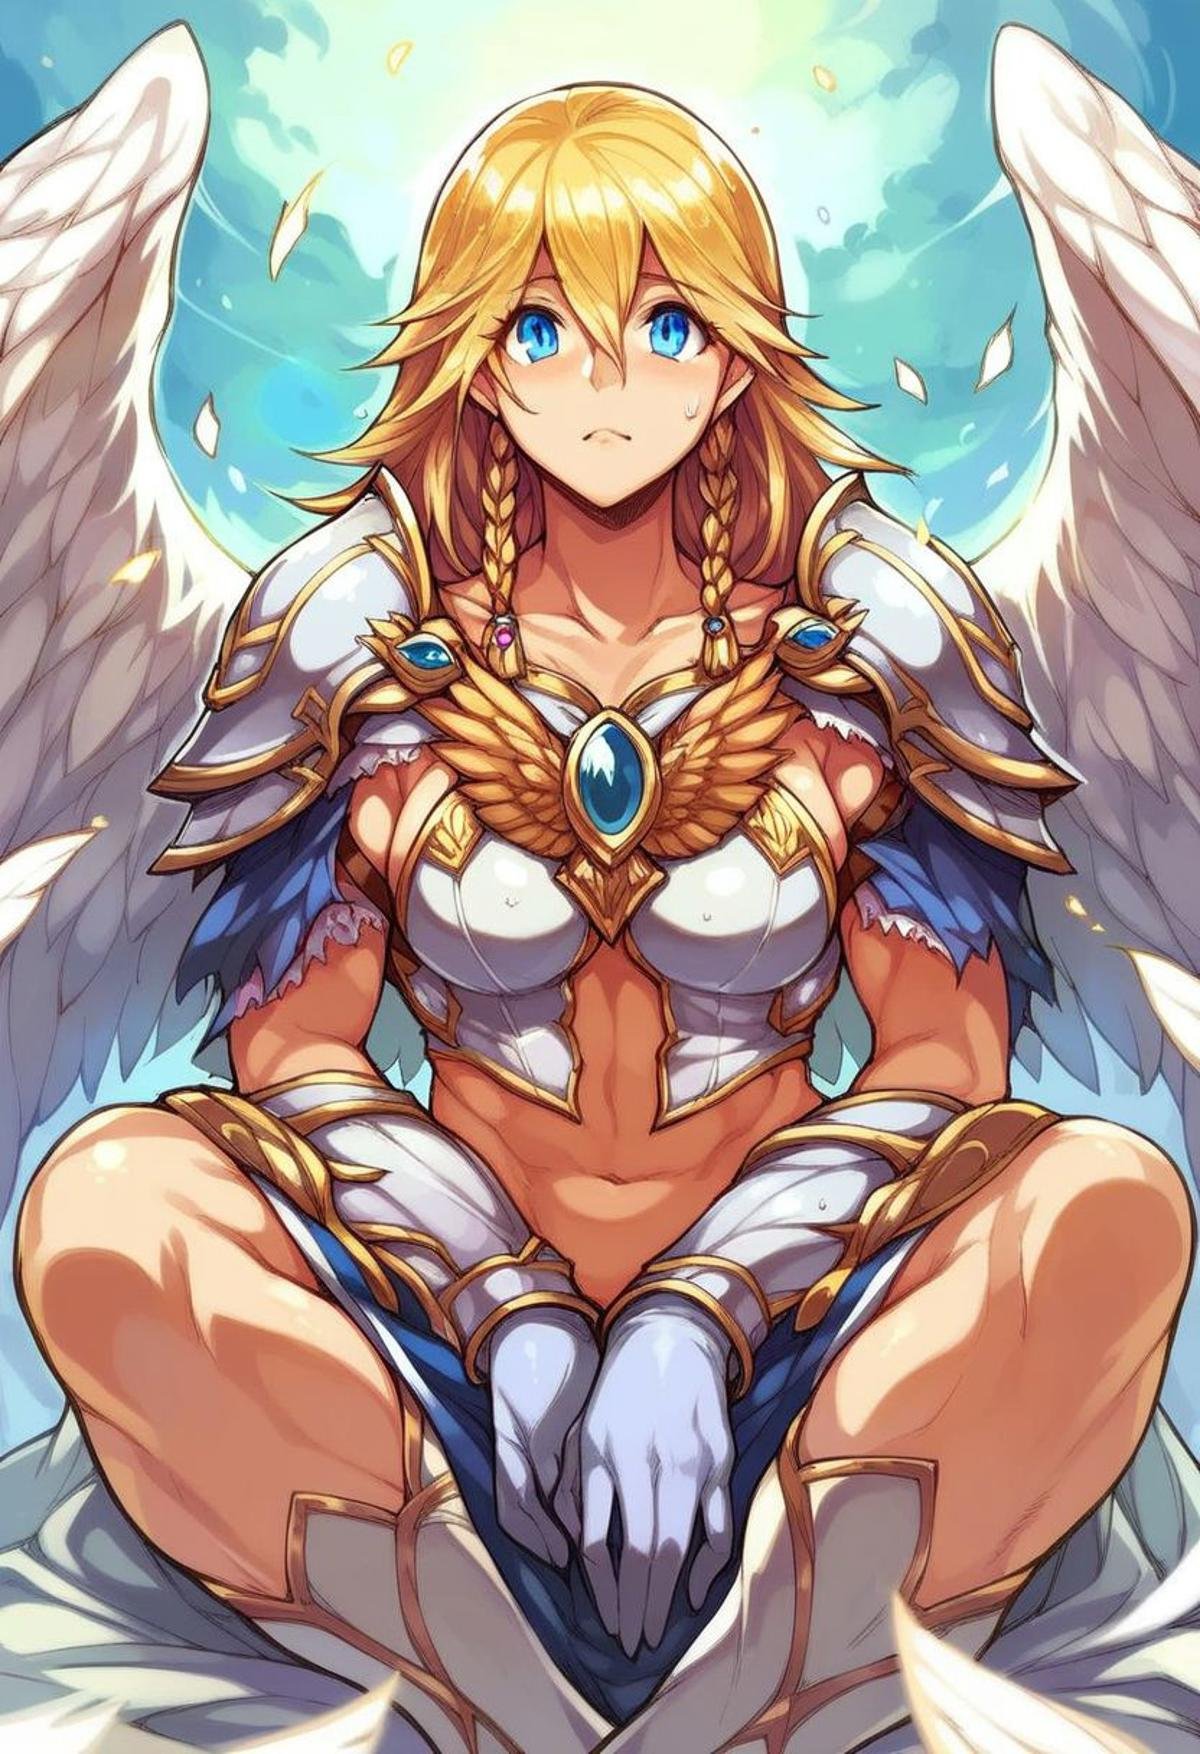 score_9, score_8_up, score_7_up, (masterpiece:1.1), (best quality:1.1), (detailed face and eyes:1.1), woman, blonde hair, blue eyes, valkyrie, valkyrie armor, angel wings, full body,BREAK intricate detail, detailed hair, realistic, sharp focus, perfect face, perfect eyes, zPDXL,  zPDXLxxx